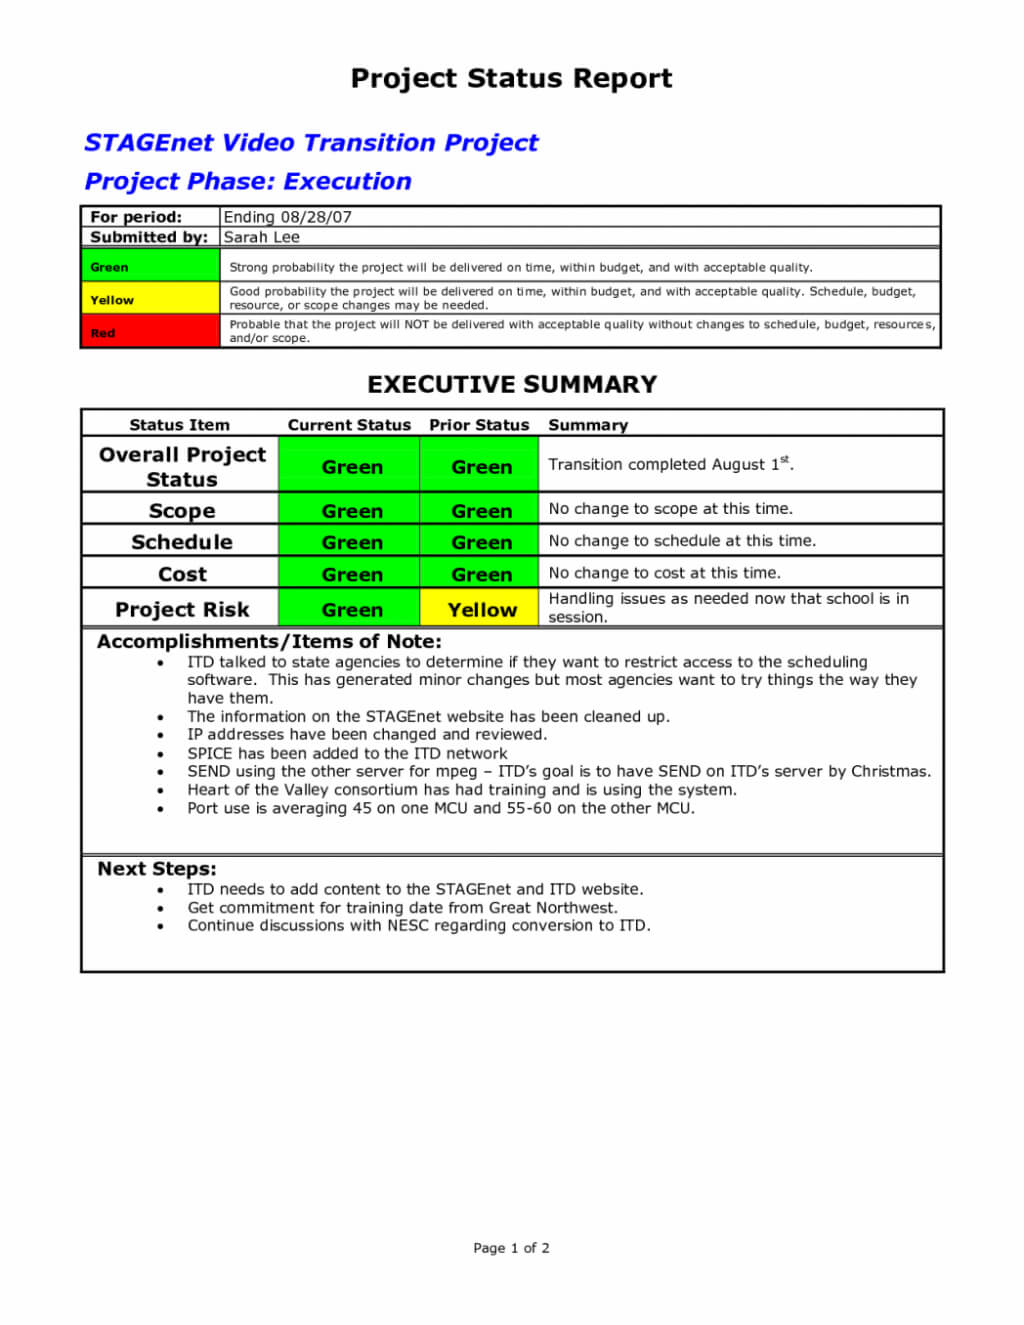 Project Status Report Emplate Word Free Daily Excel Download With Project Status Report Template Word 2010